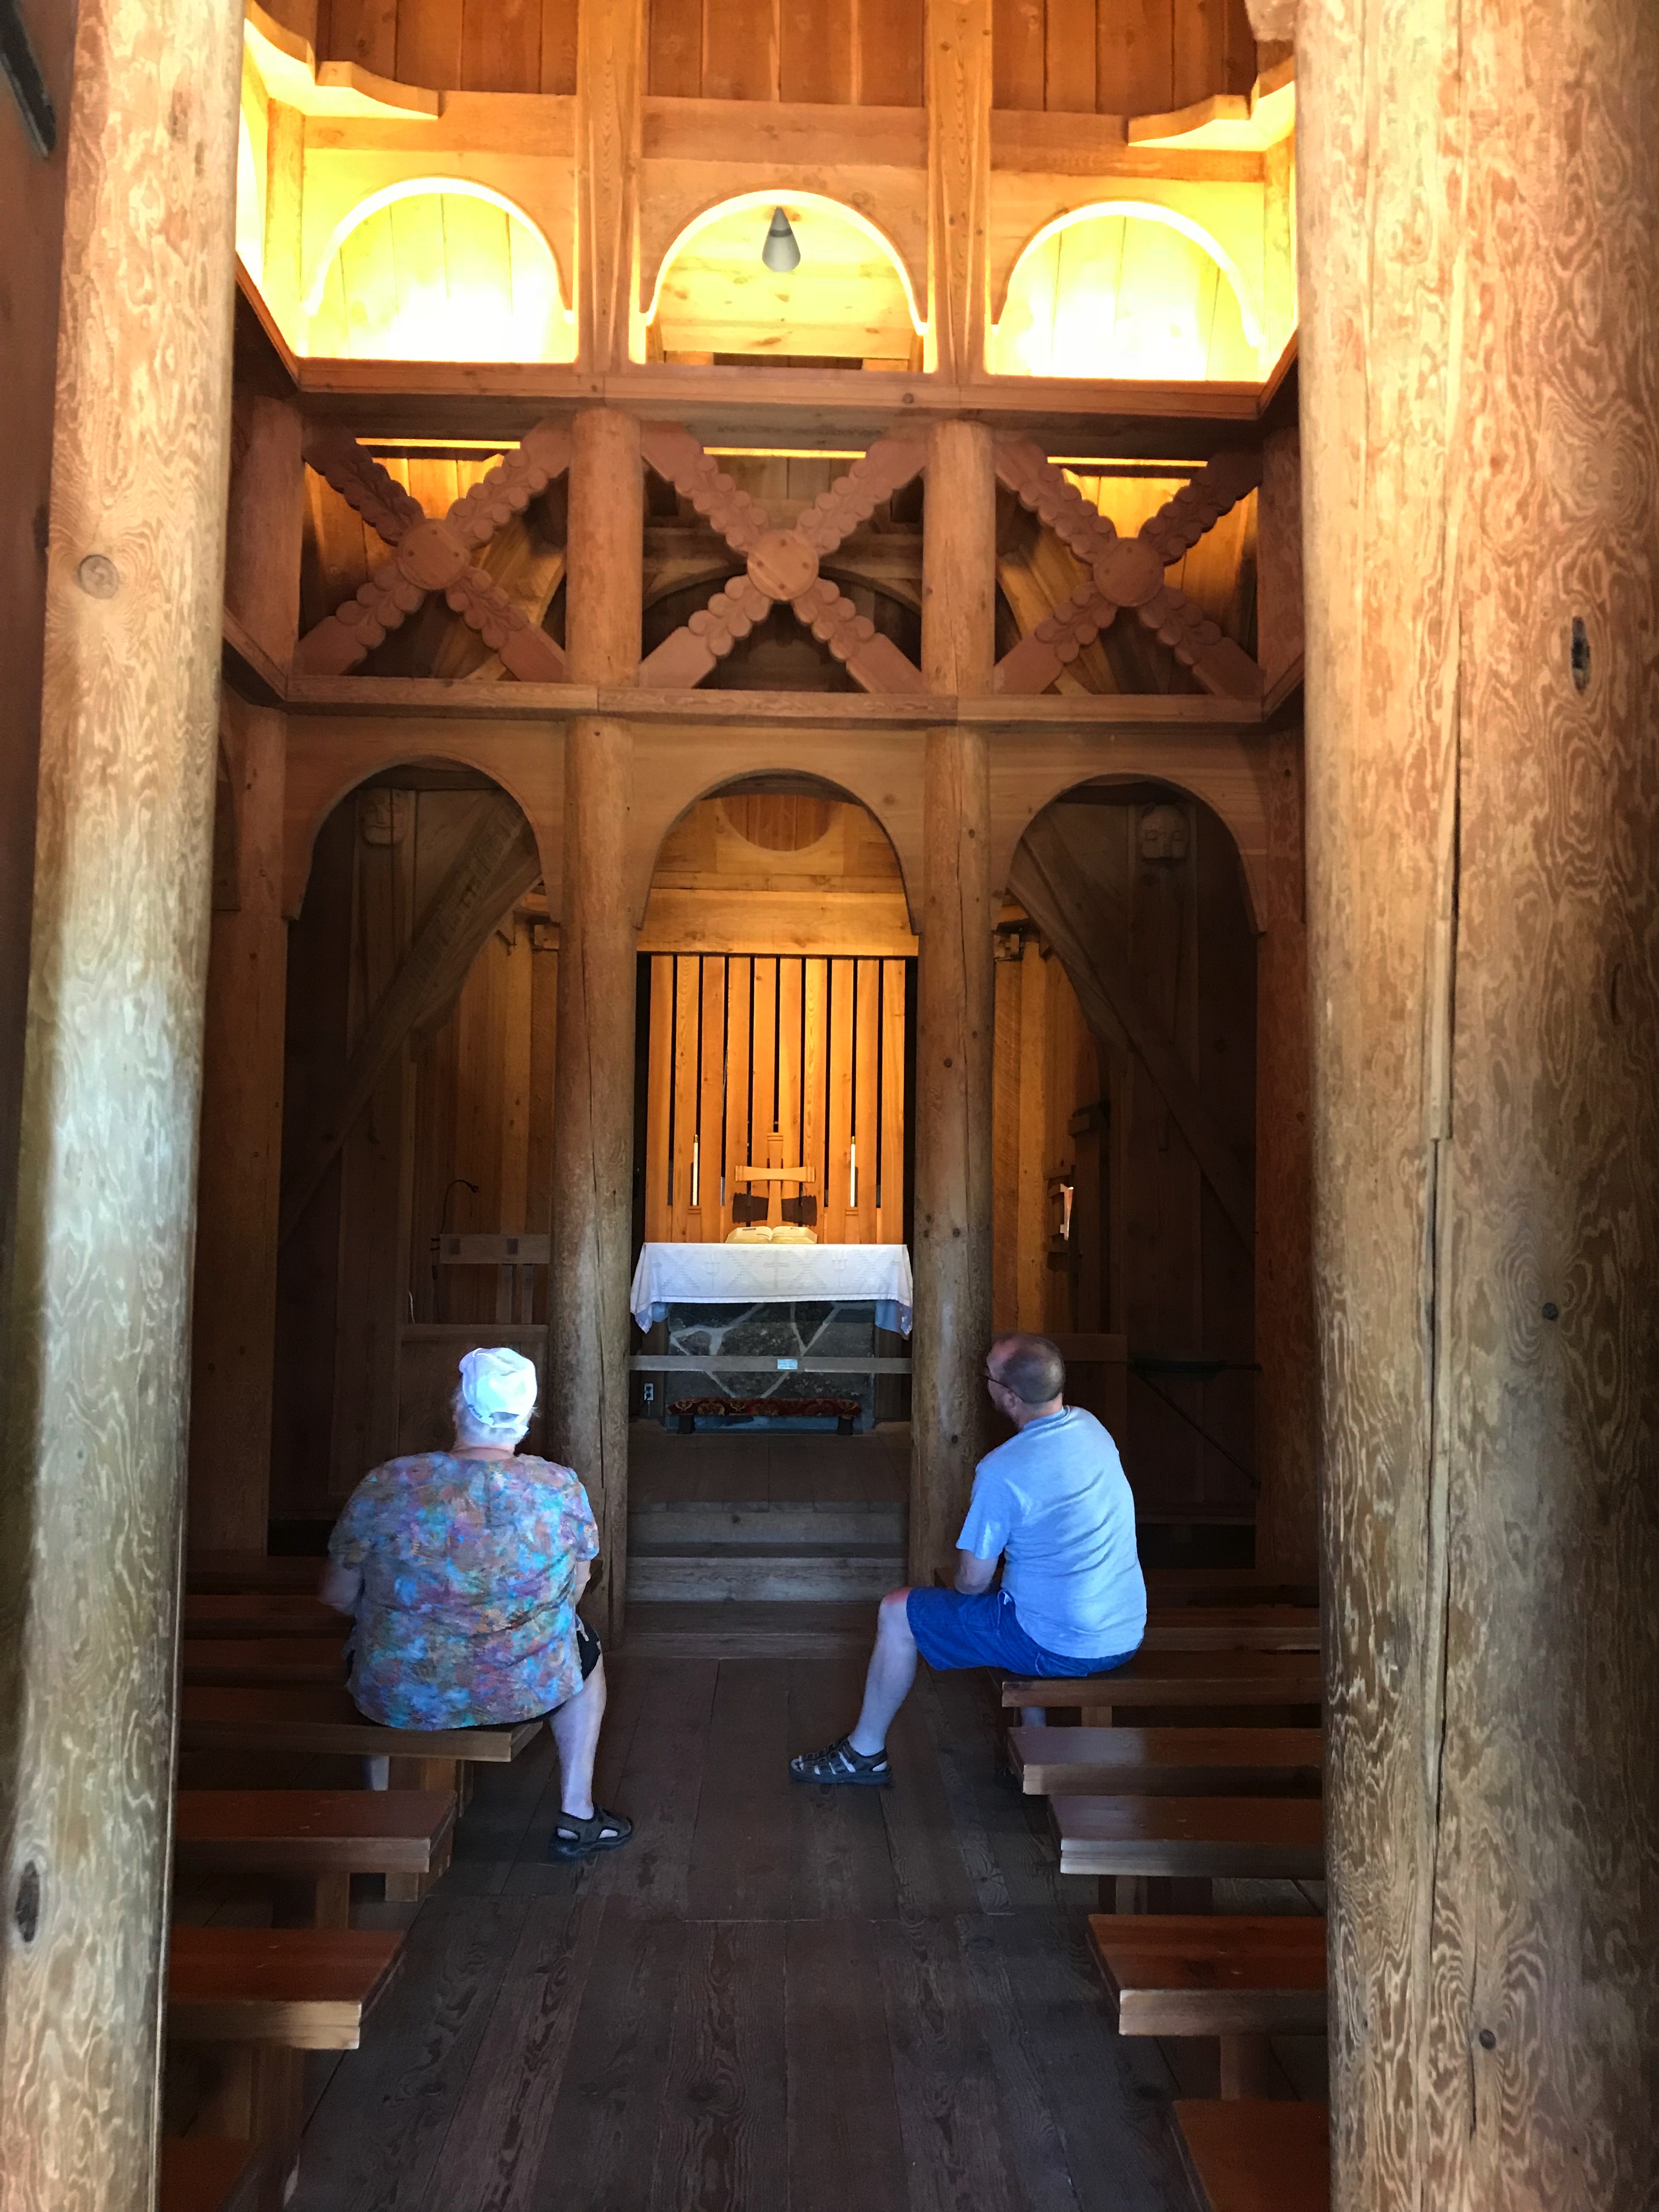 Rear view of two people, a man and a woman, sitting on wooden benches looking around the interior of a wooden church.